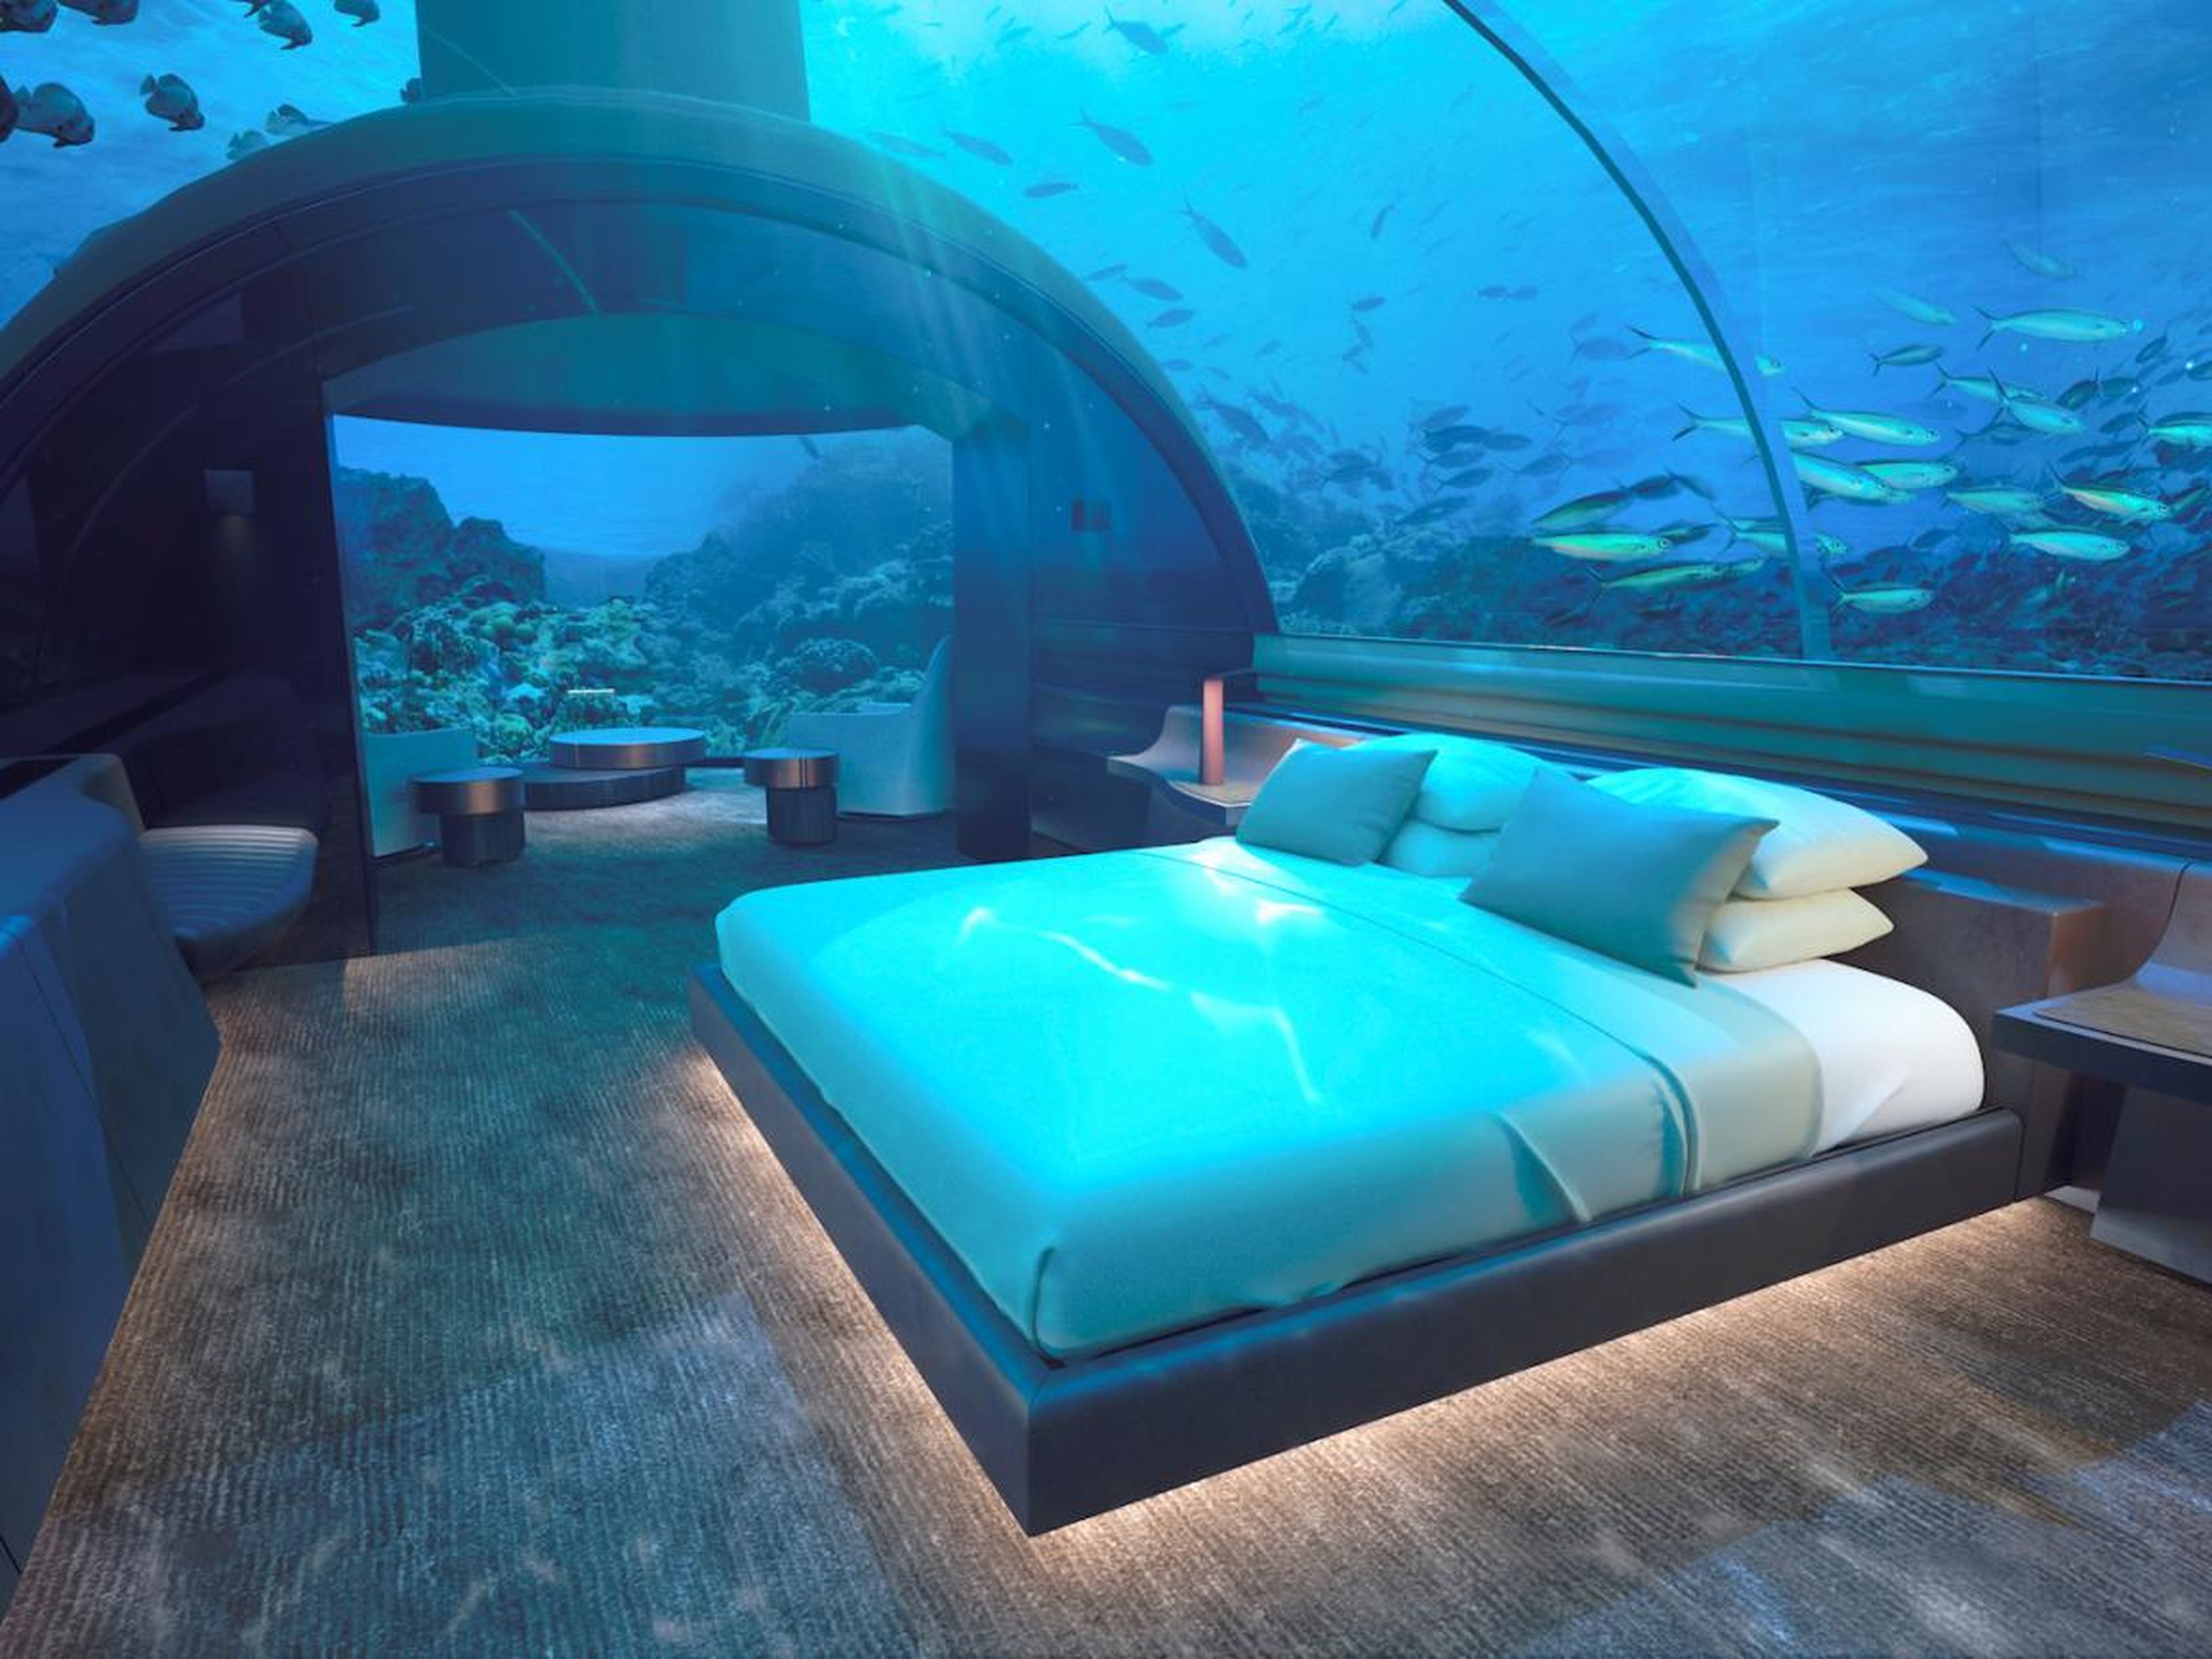 The undersea master bedroom, which fits a king-size bed, offers 180-degree views of sea life for an otherworldly experience. You can even wash your hands and shower while watching the fish swim by.